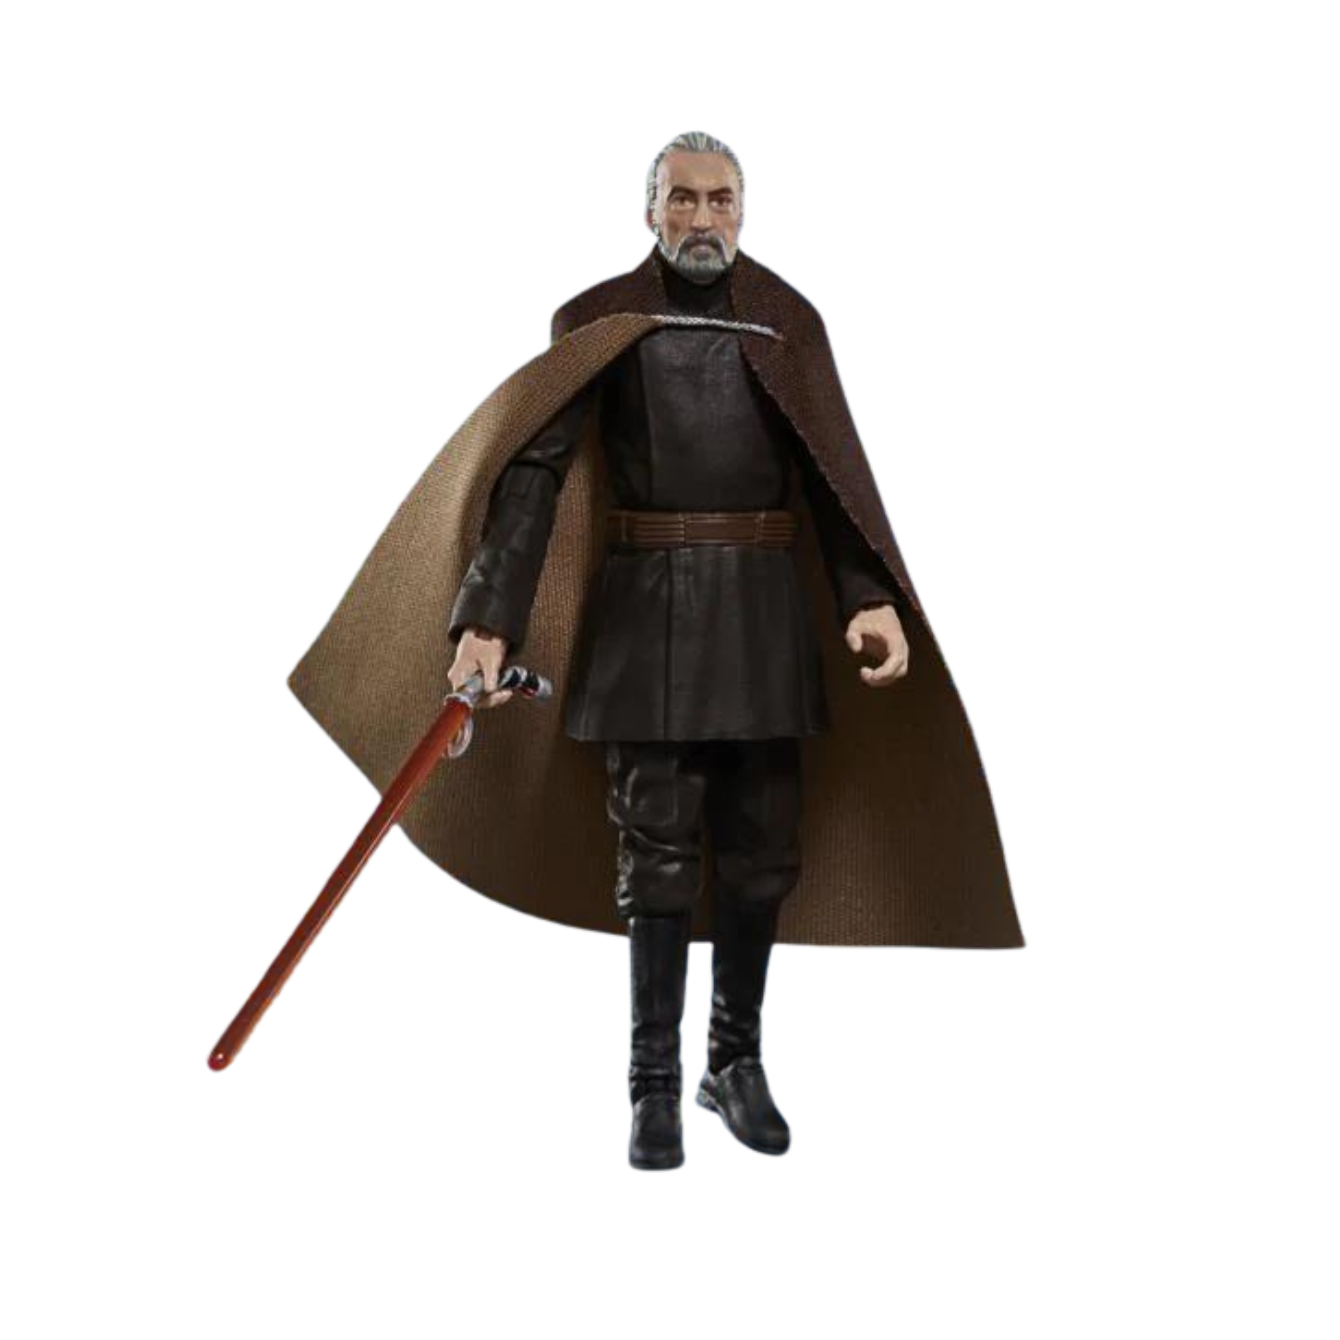 Star Wars: The Vintage Collection Count Dooku (Attack of the Clones)